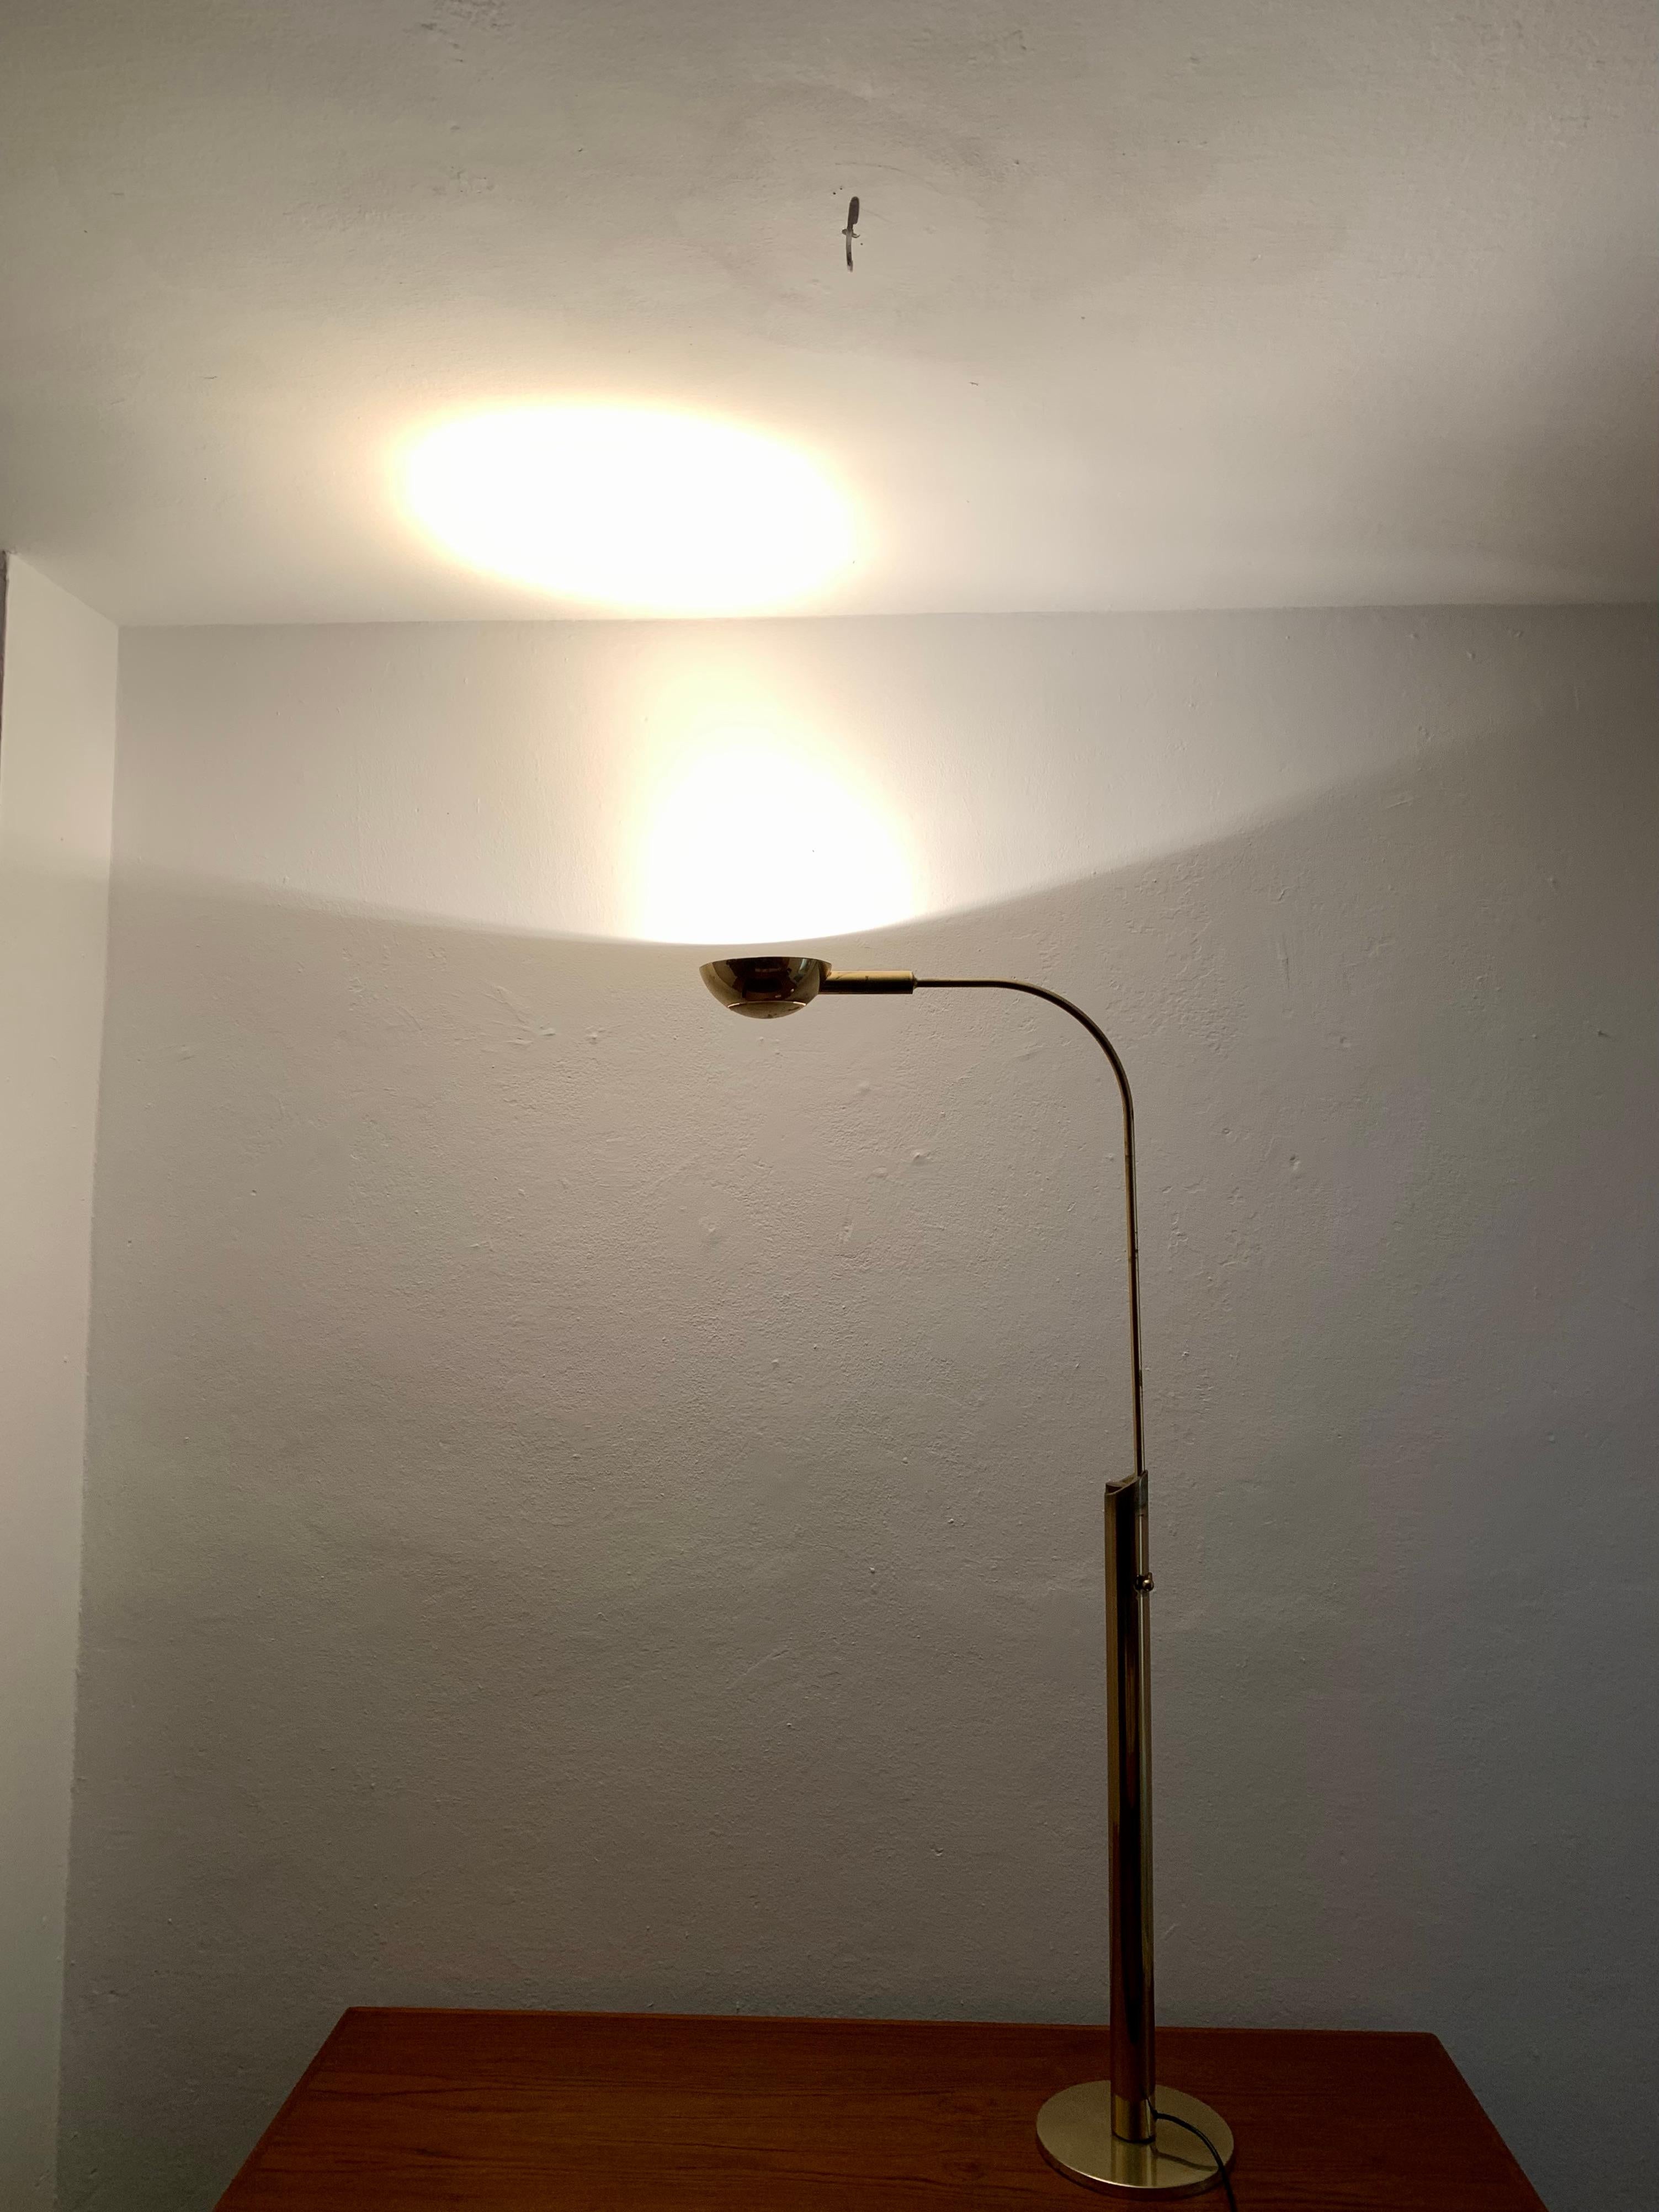 Late 20th Century Brass Floor Lamp by Florian Schulz For Sale